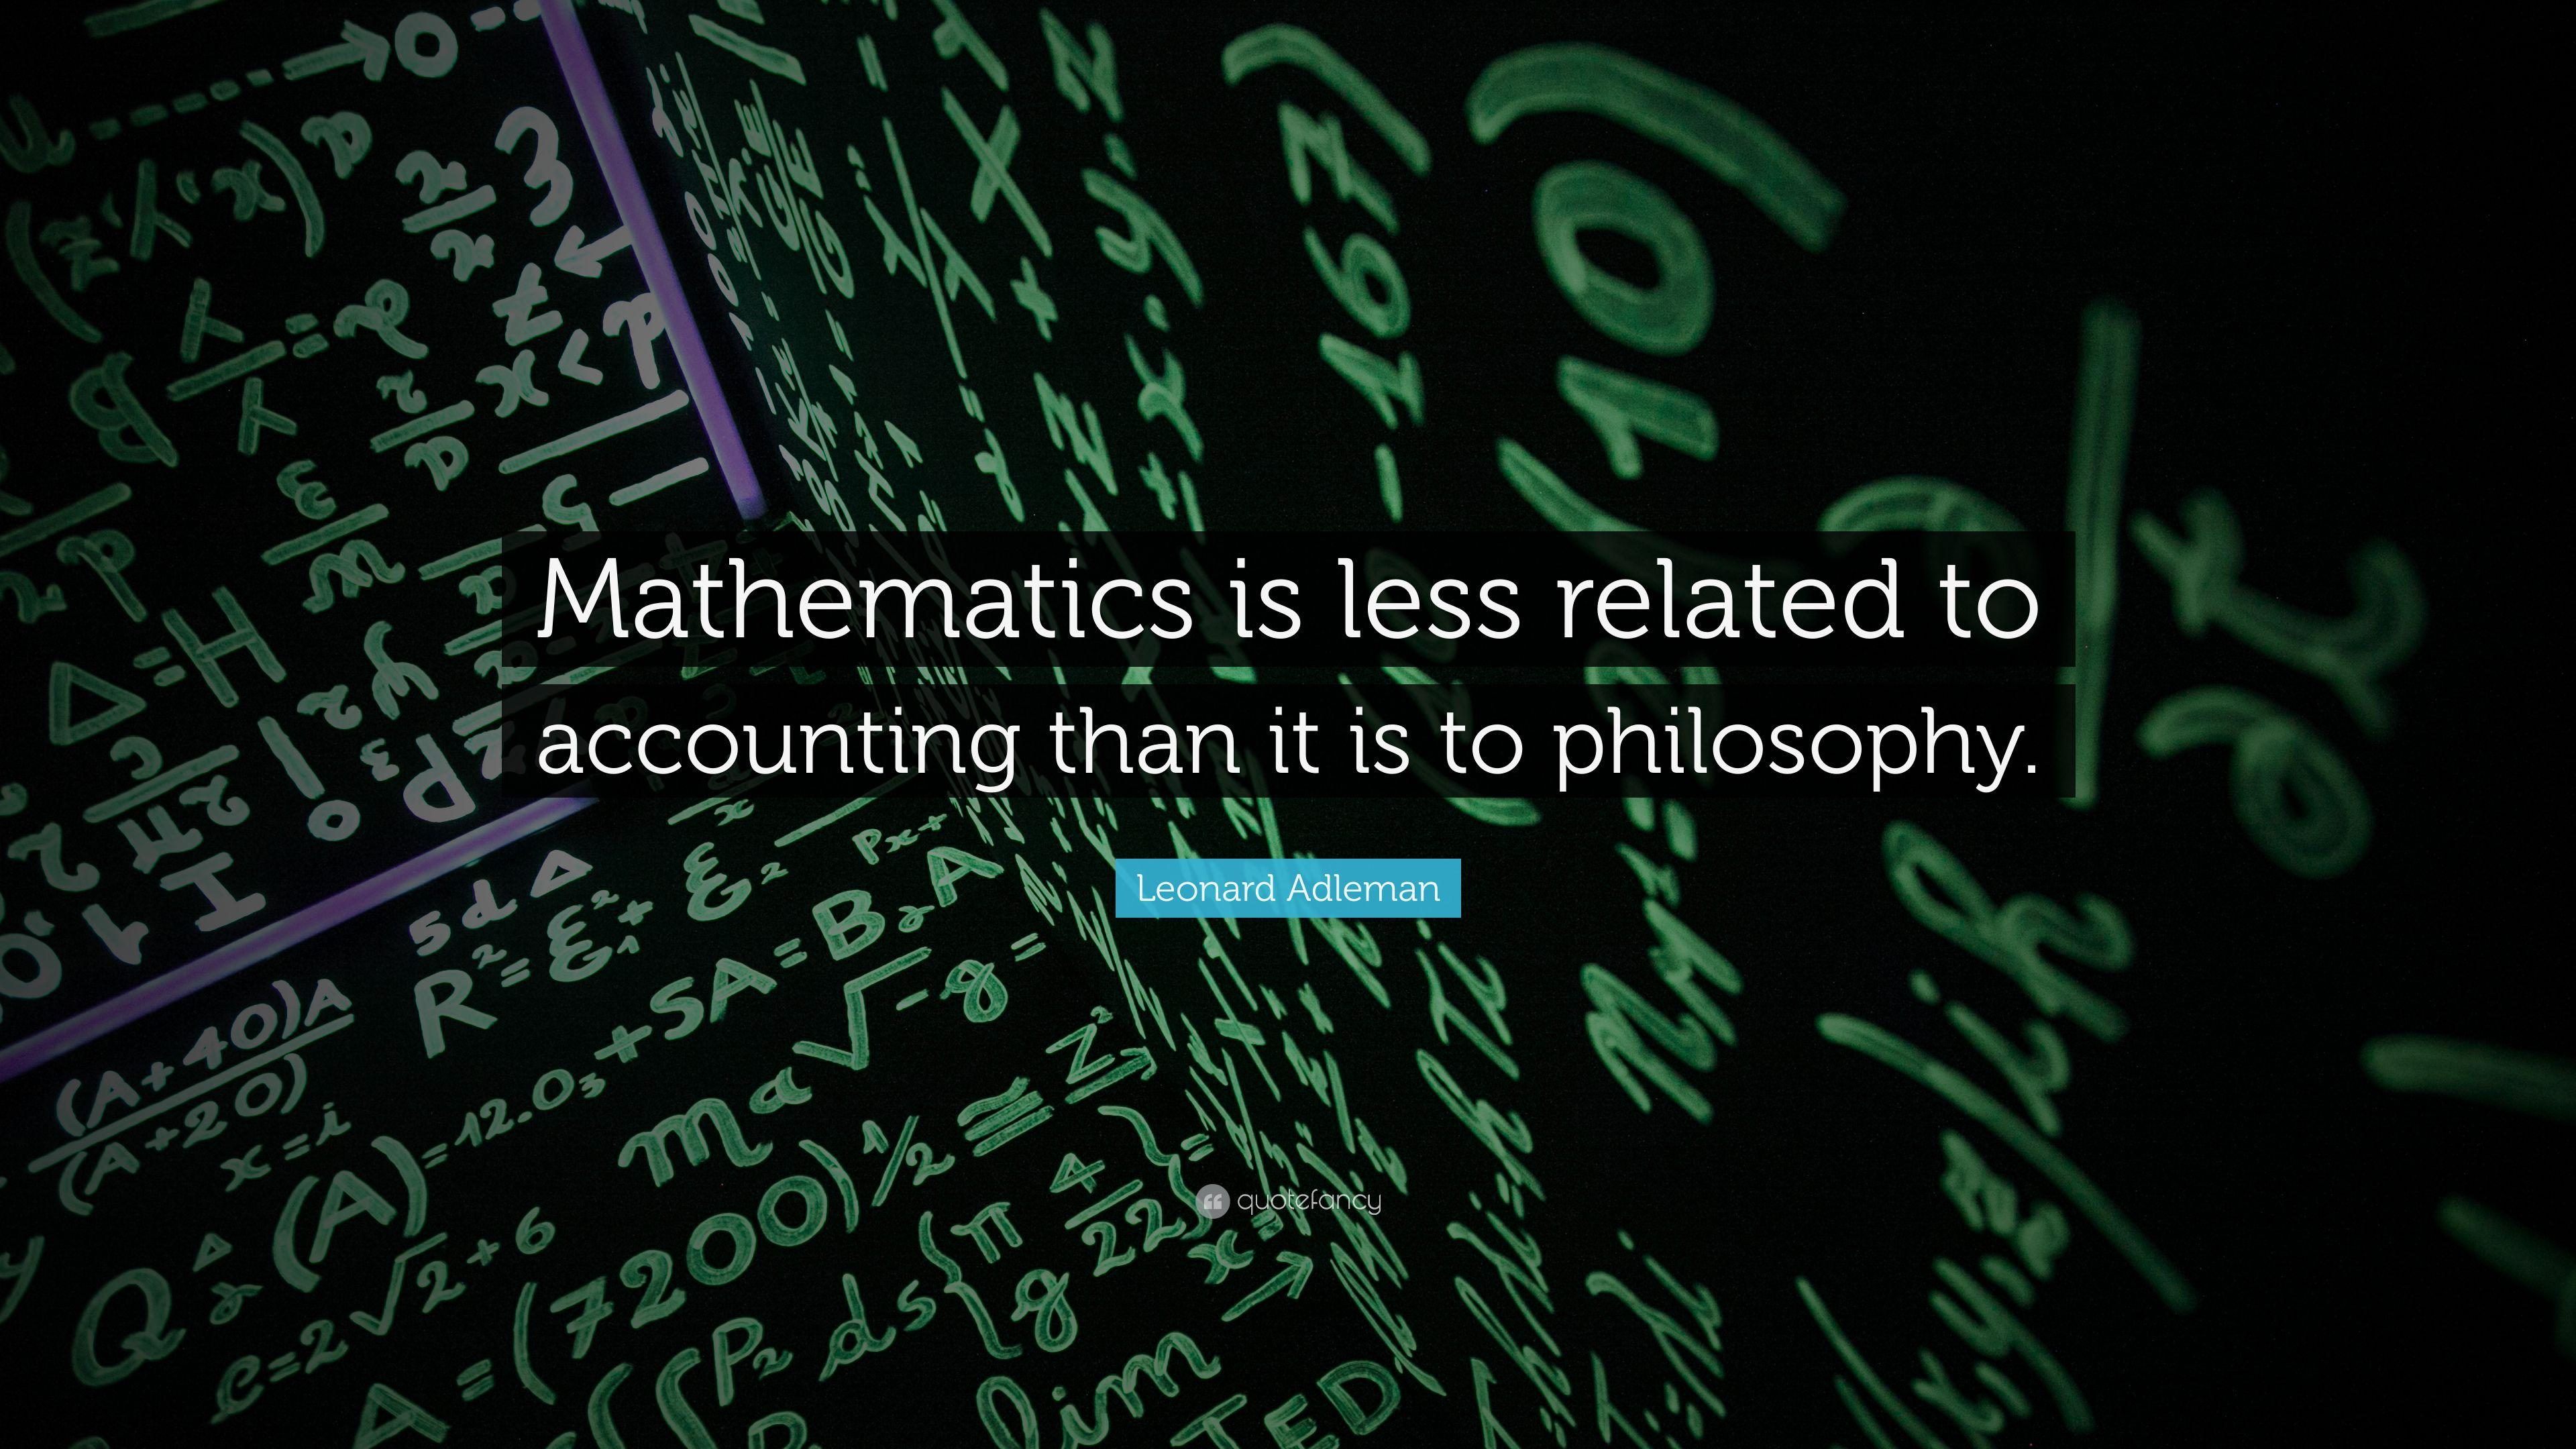 Leonard Adleman Quote: “Mathematics is less related to accounting